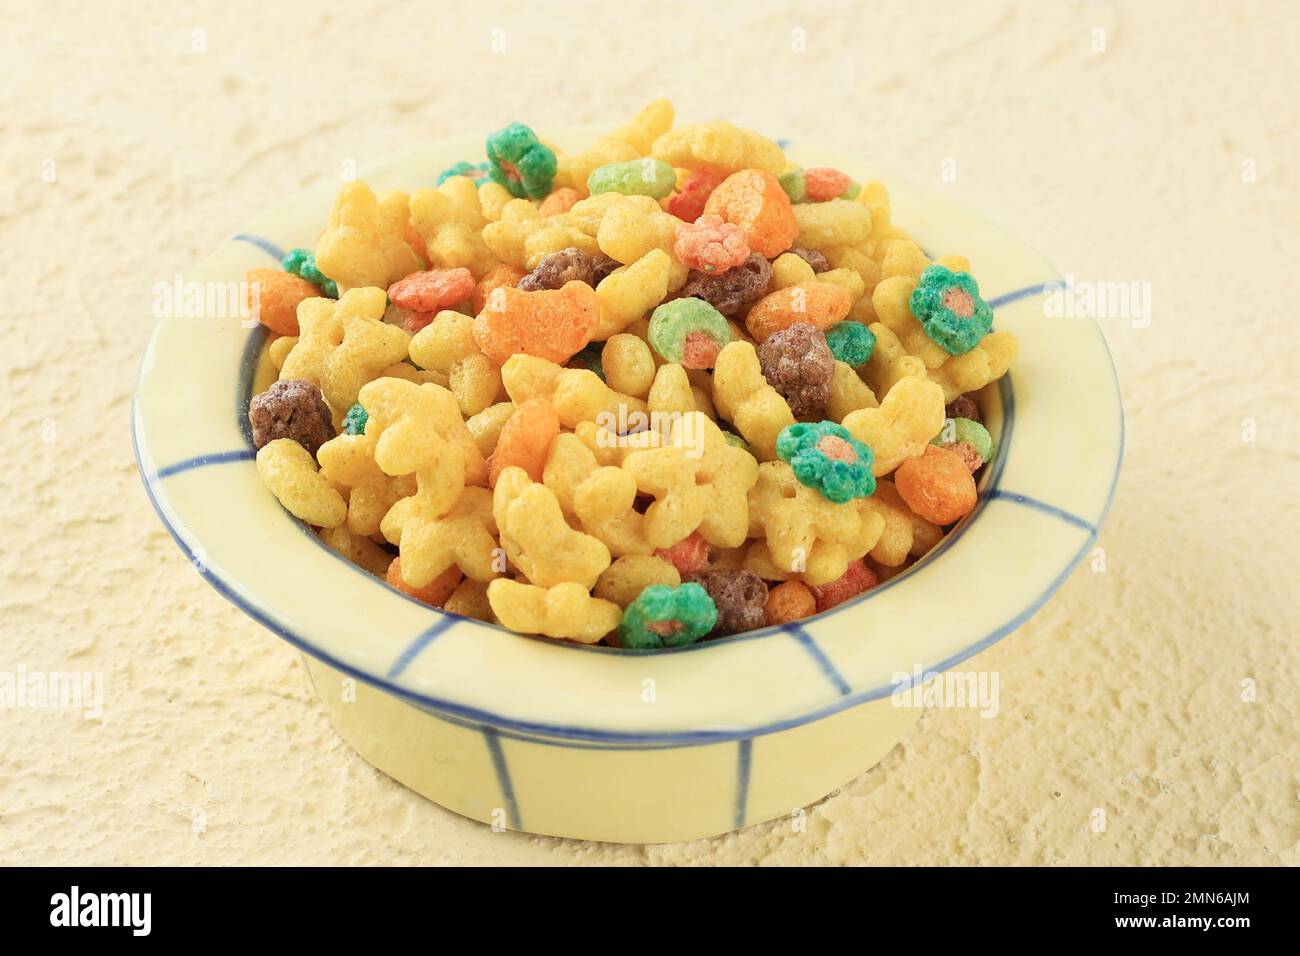 Colorful Star and Fruit Loops Cereal in A Bowl, Close Up Stock Photo